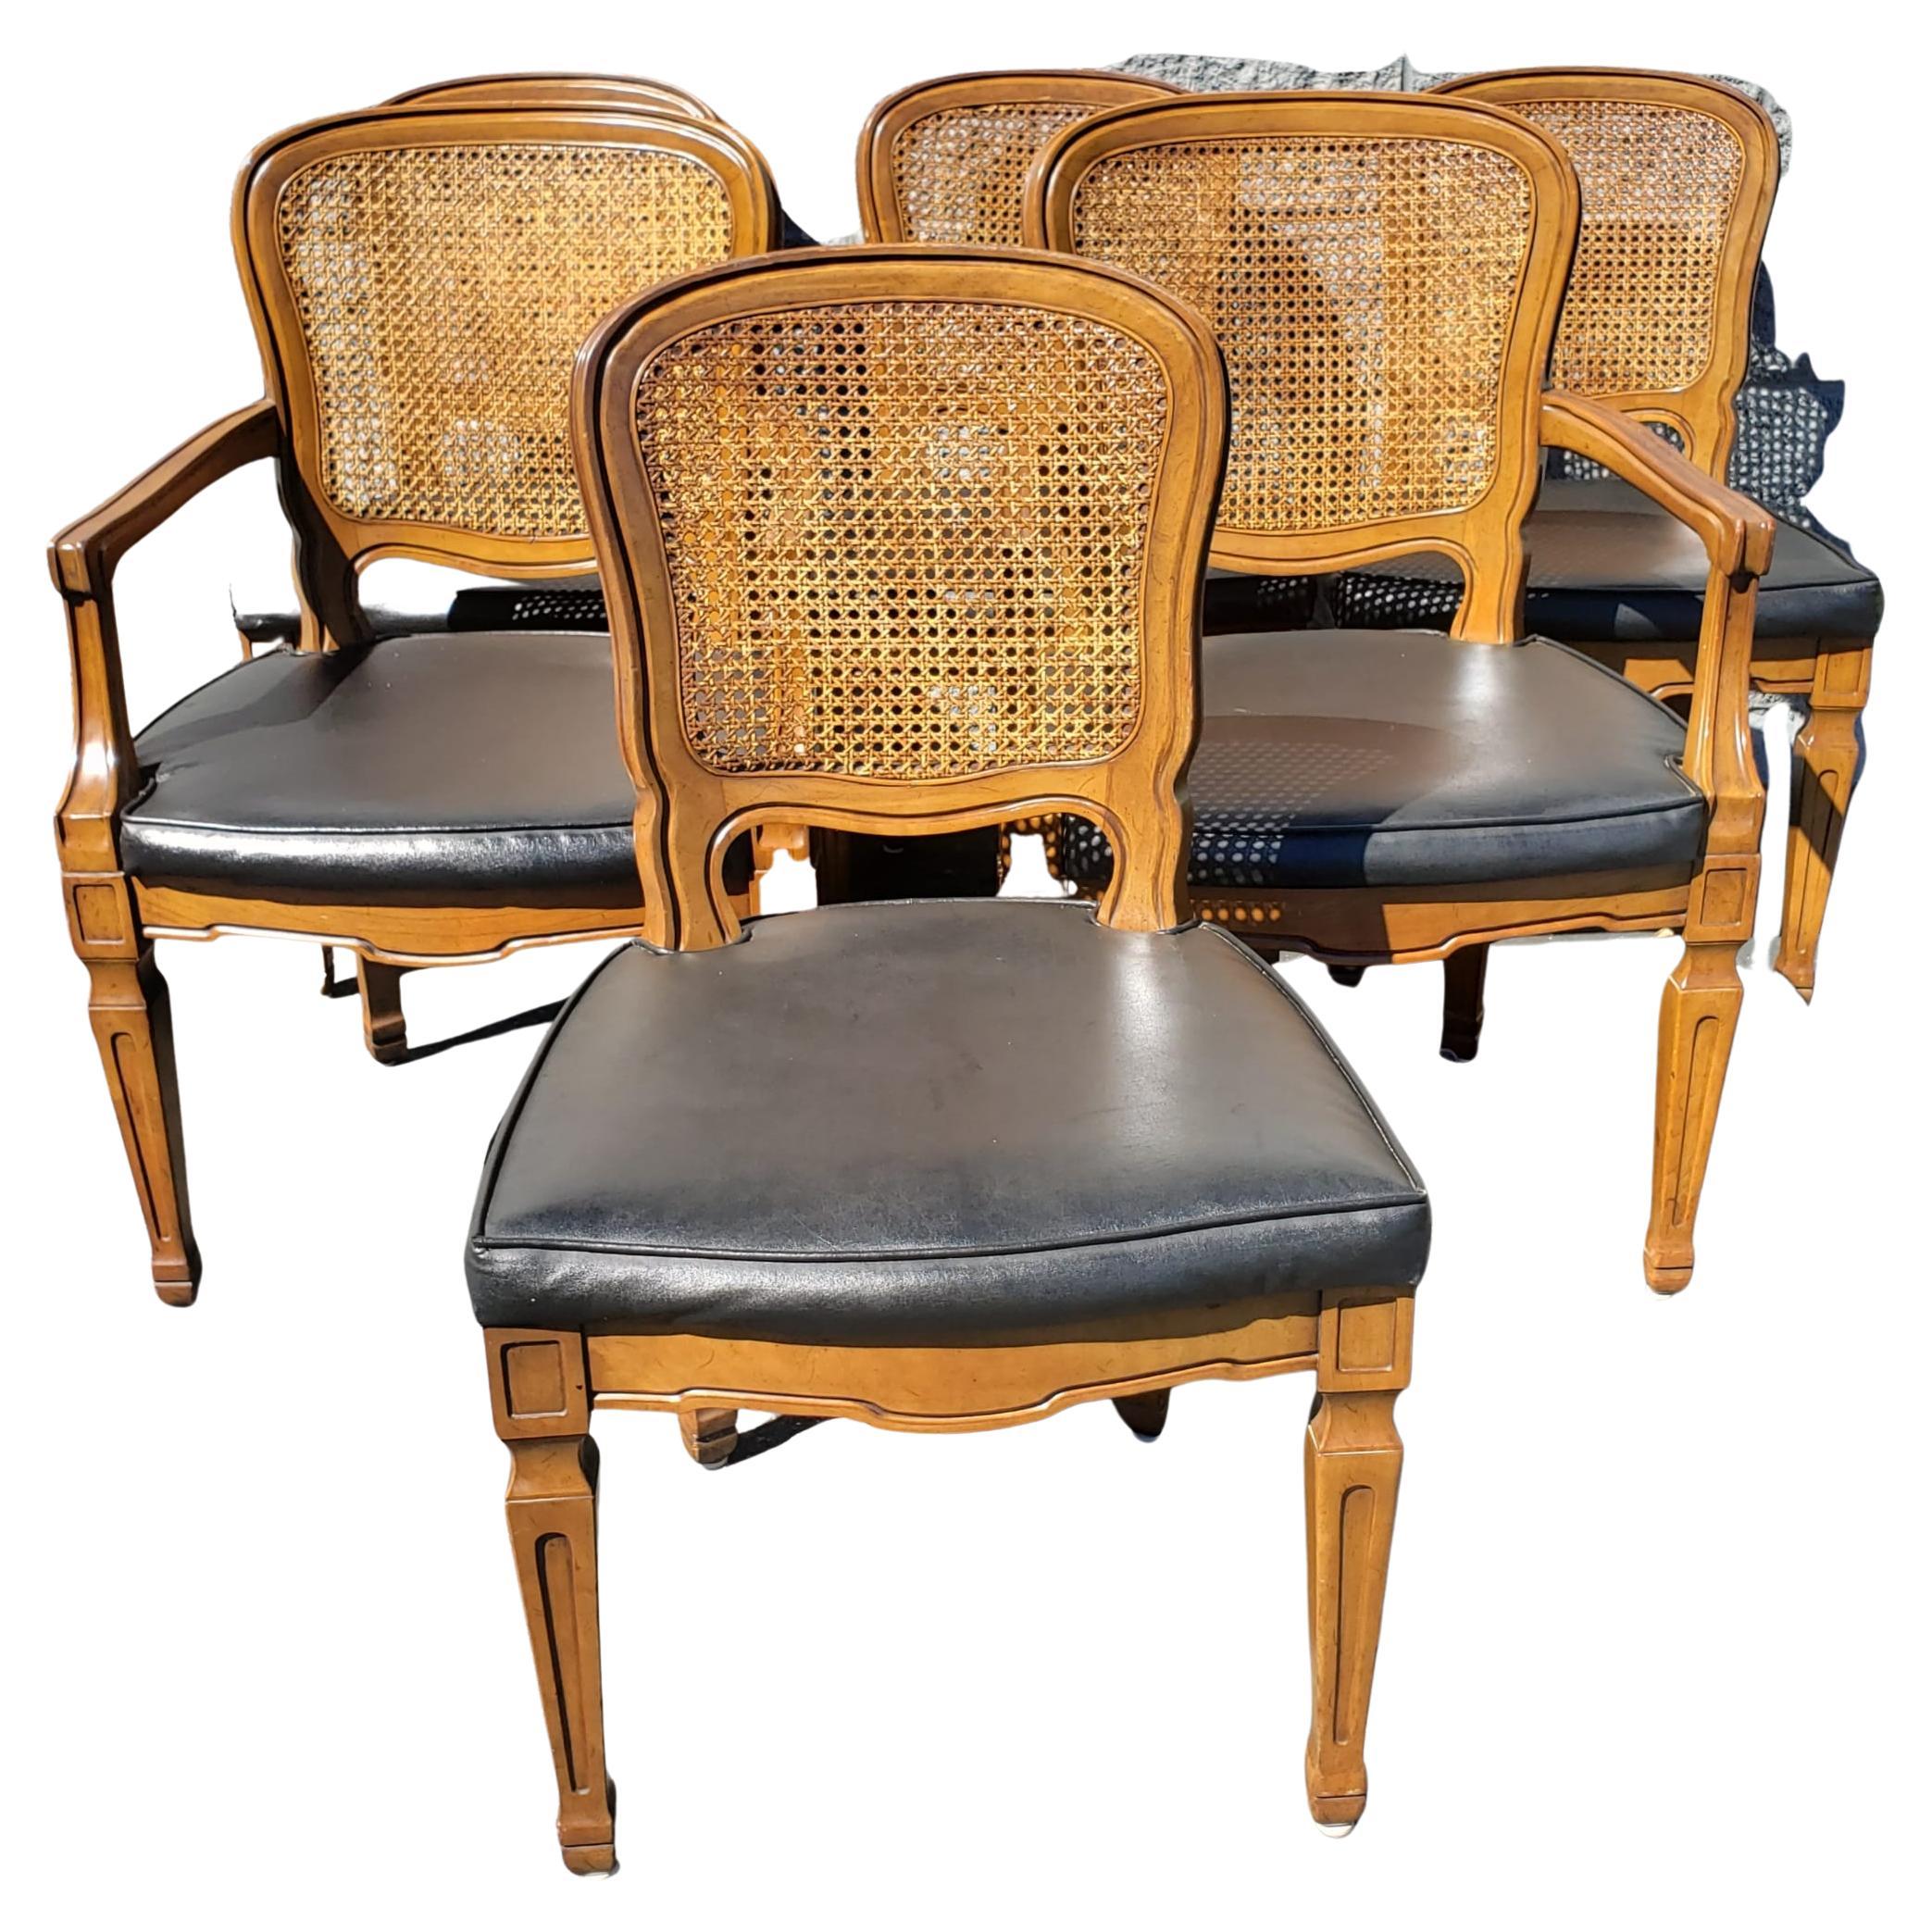 20th Century Henredon French Country Cane Back w/ Leatherette Seats Dining Chairs, C 1960s